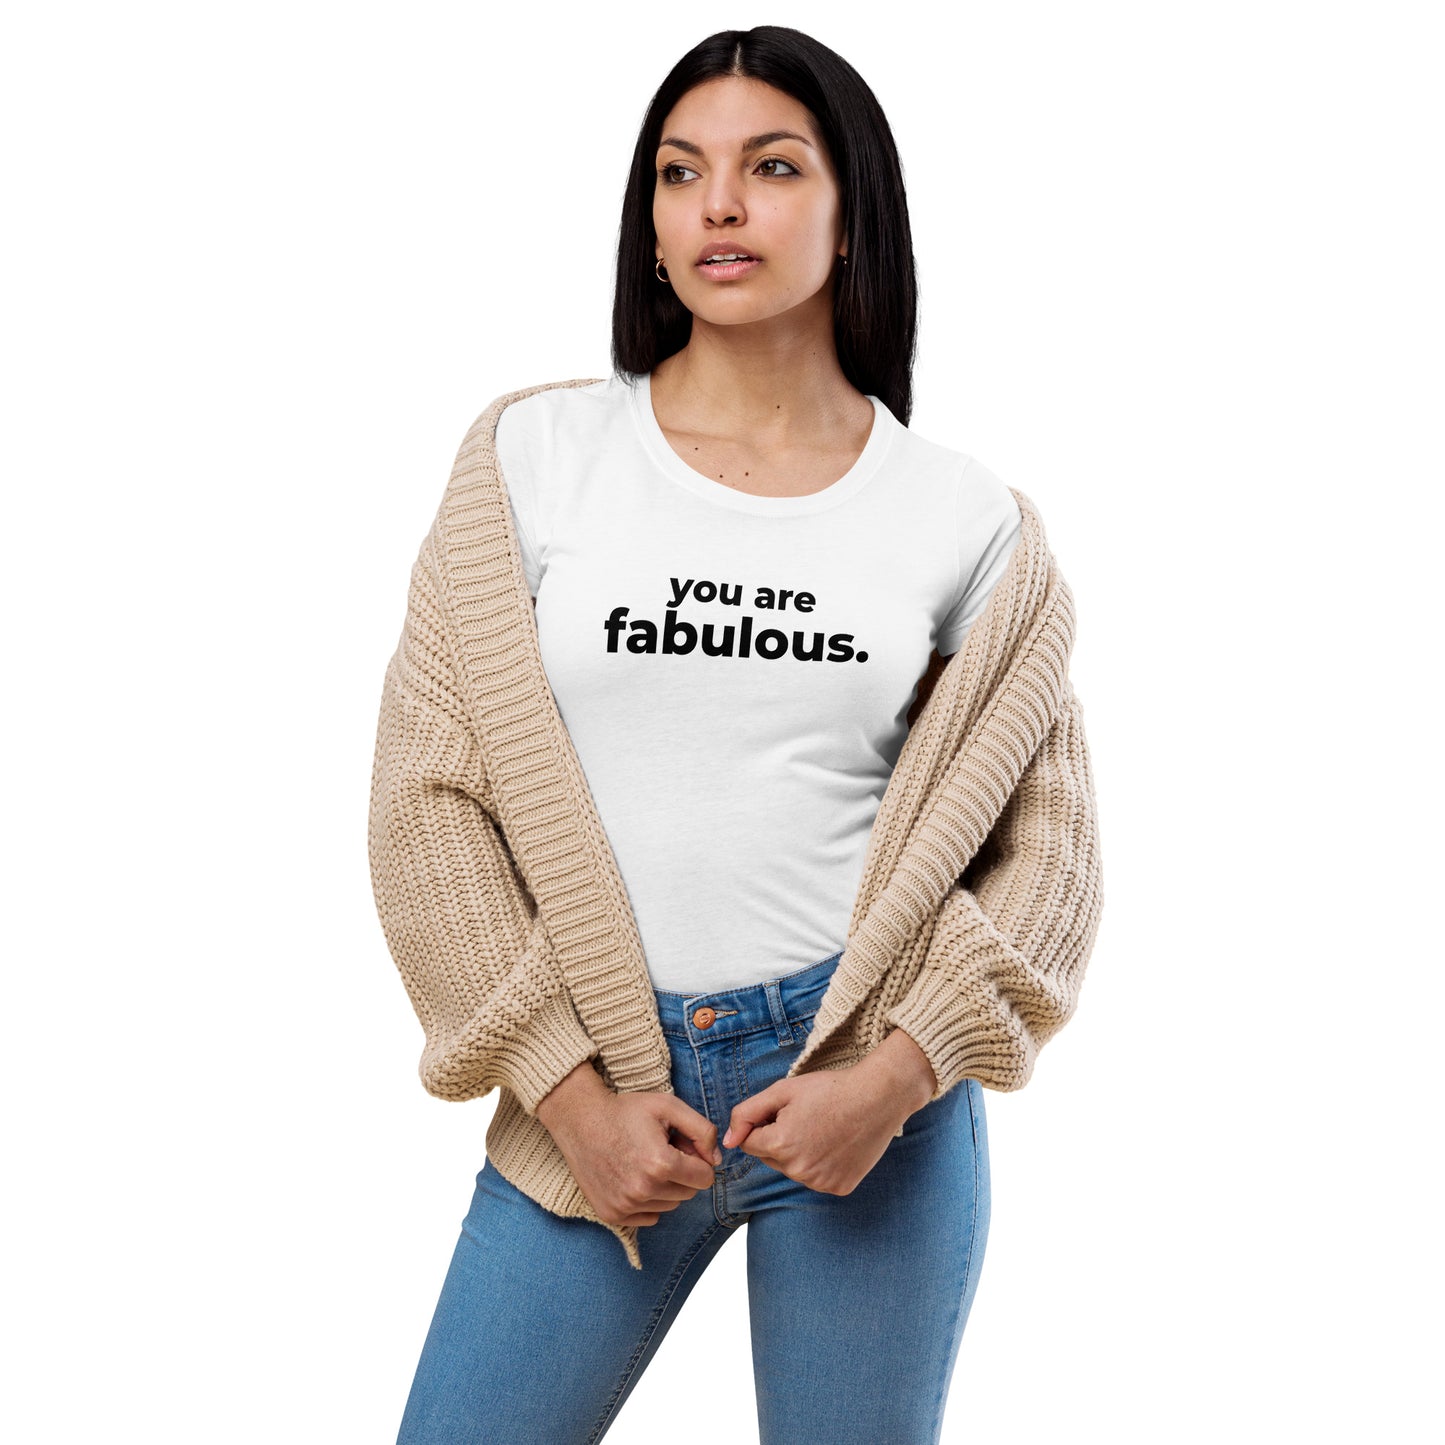 YOU ARE FABULOUS - Women’s fitted t-shirt